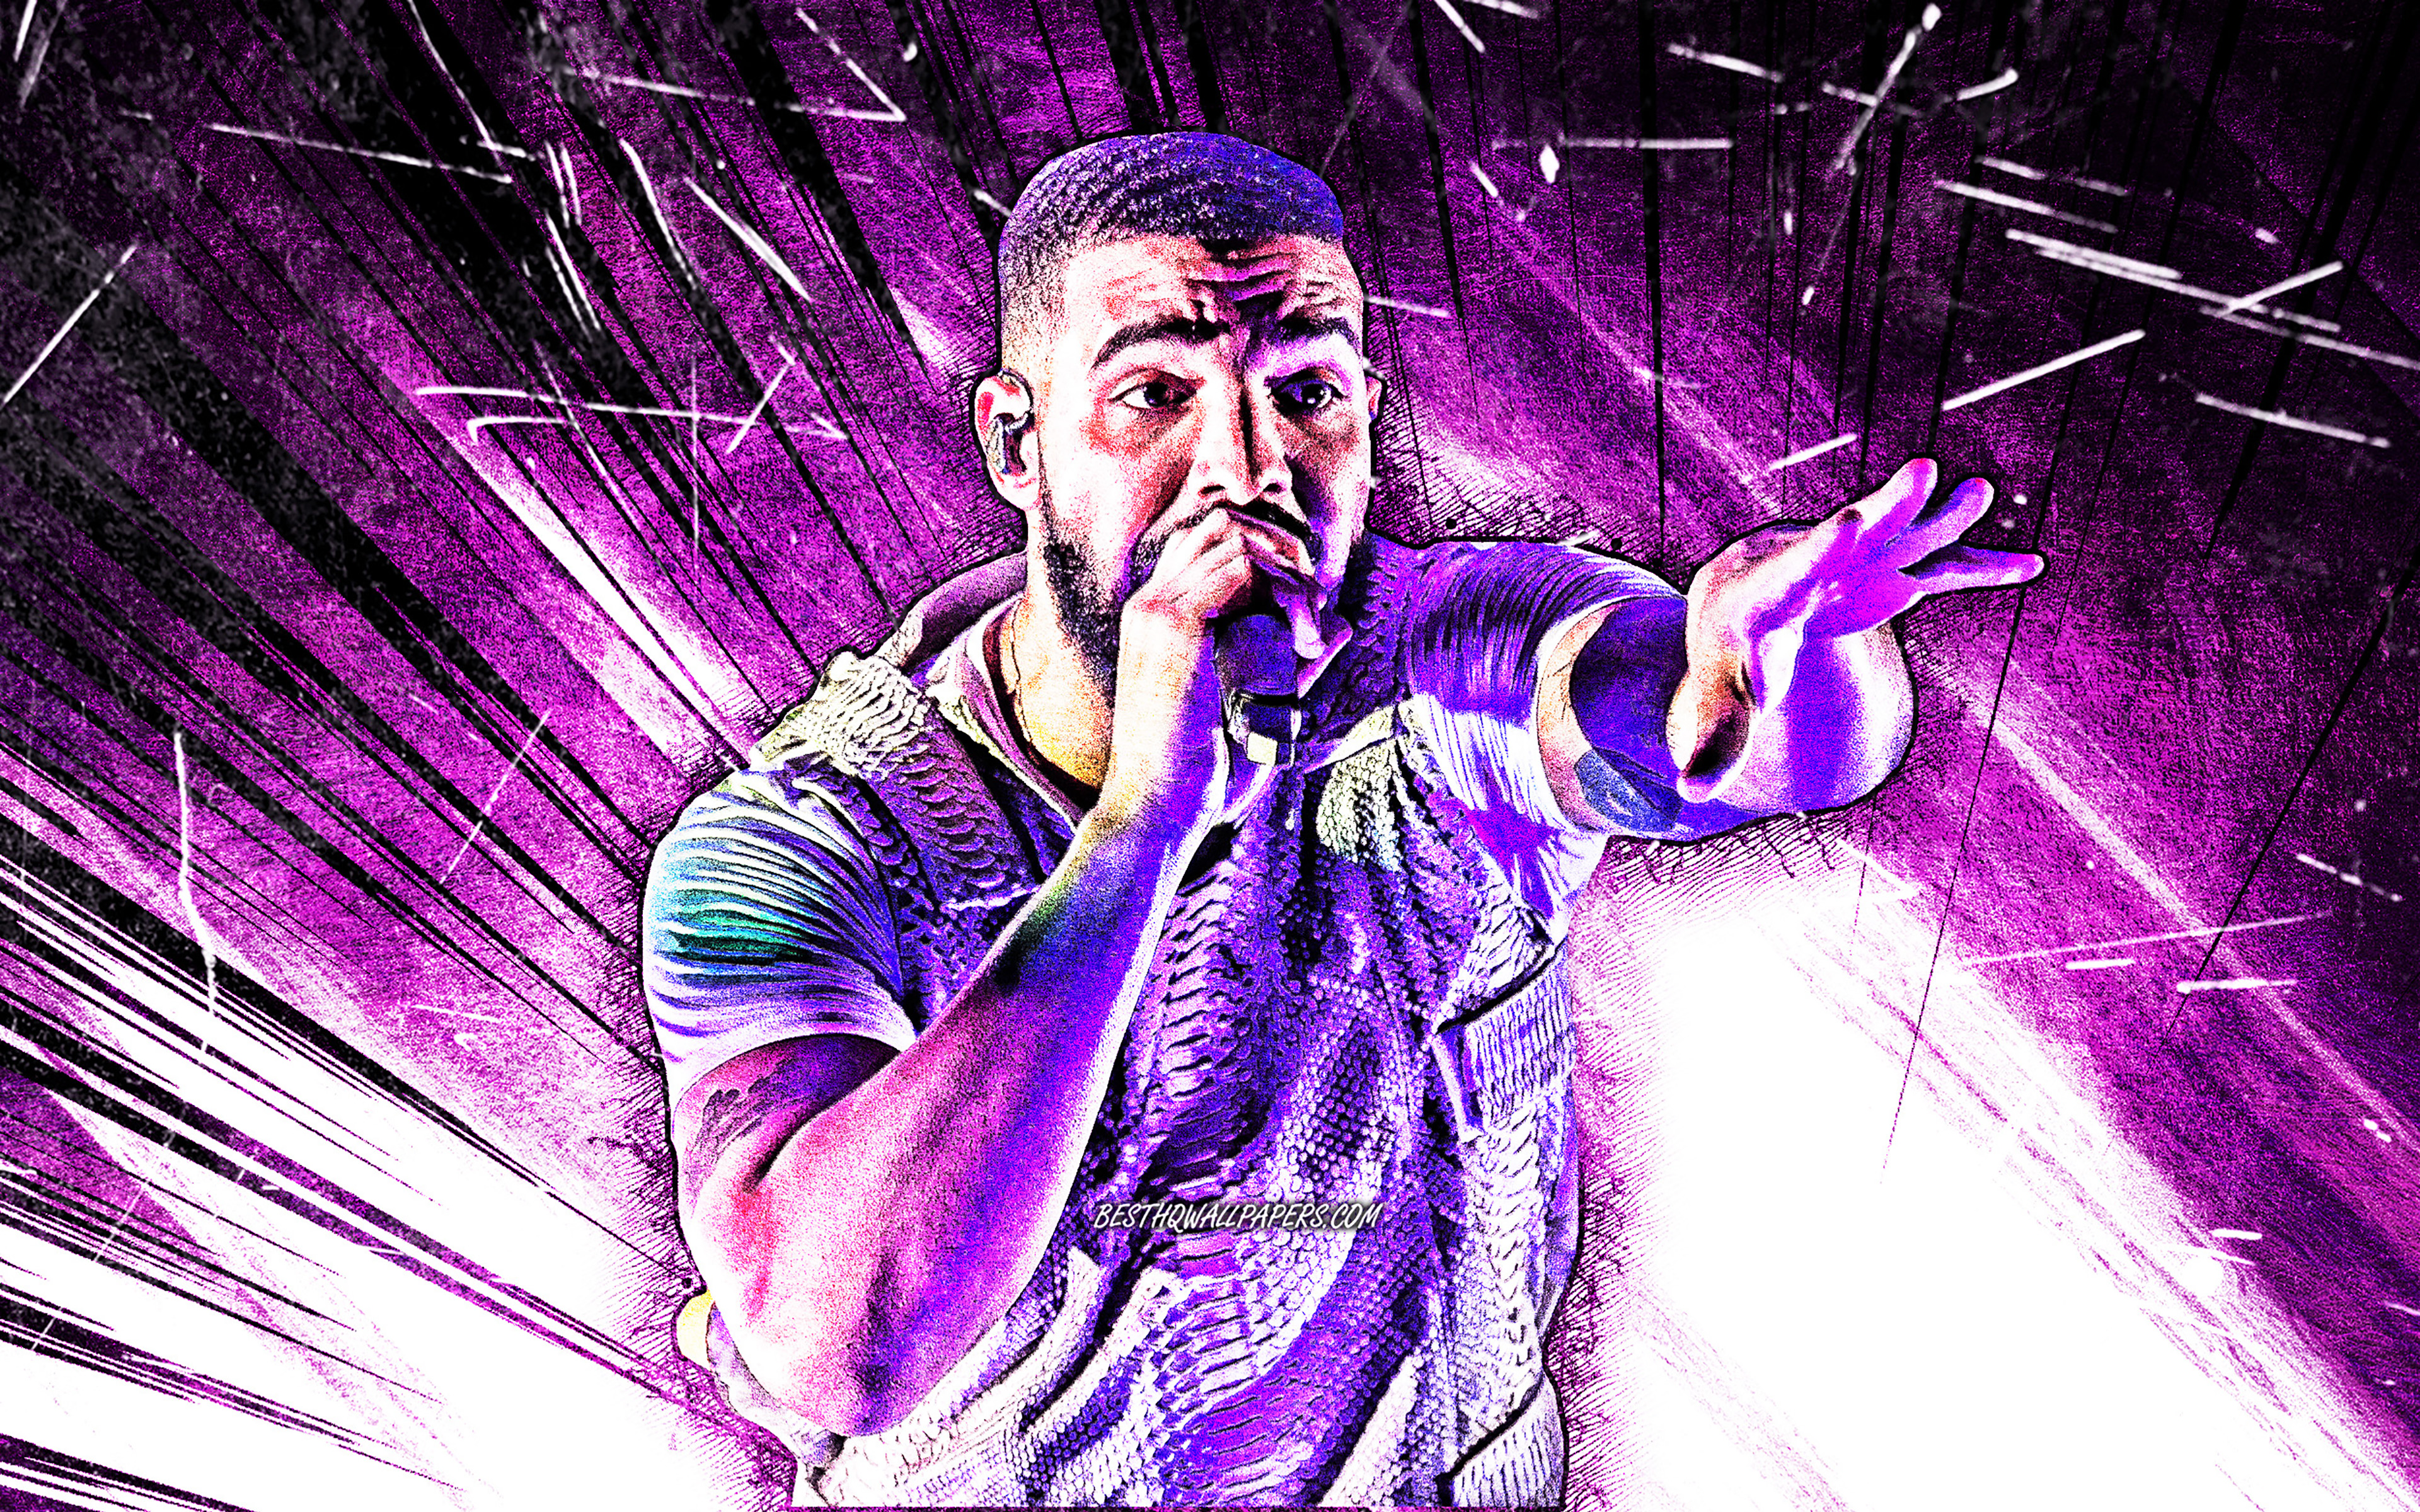 Download wallpaper Drake, grunge art, 4k, canadian rapper, violet abstract rays, music stars, Aubrey Drake Graham, Drake with microphone, creative, Drake 4K for desktop with resolution 3840x2400. High Quality HD picture wallpaper